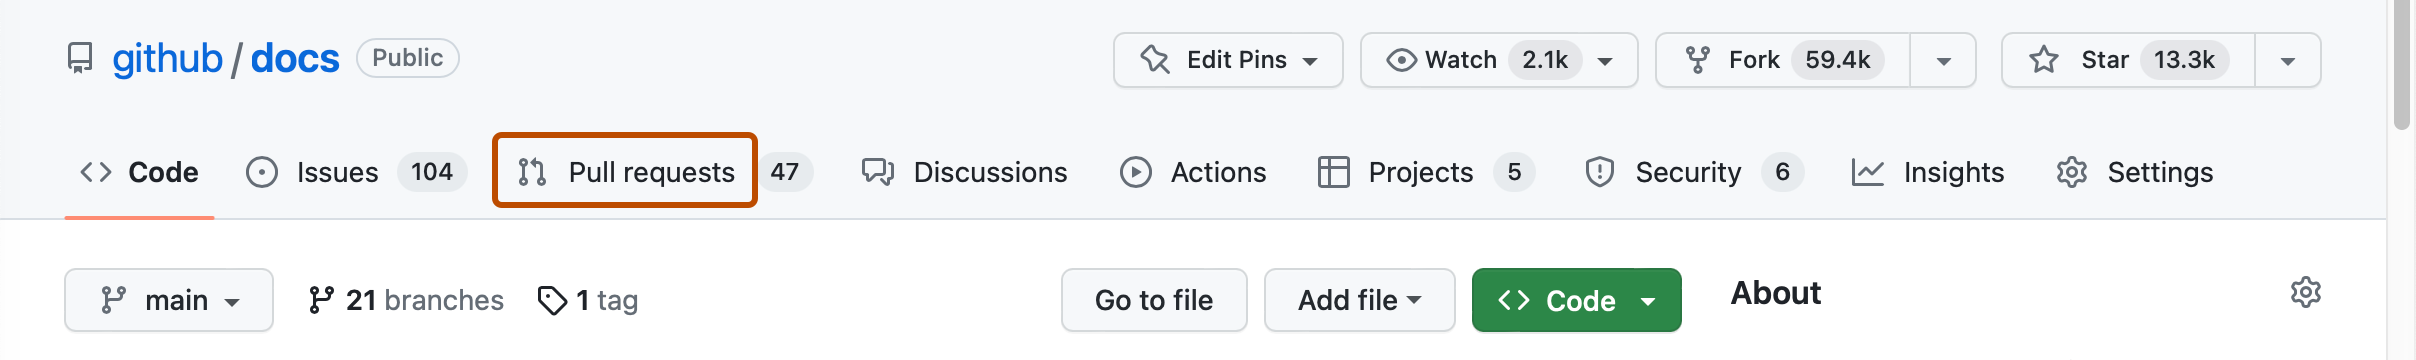 Issues and pull requests tab selection